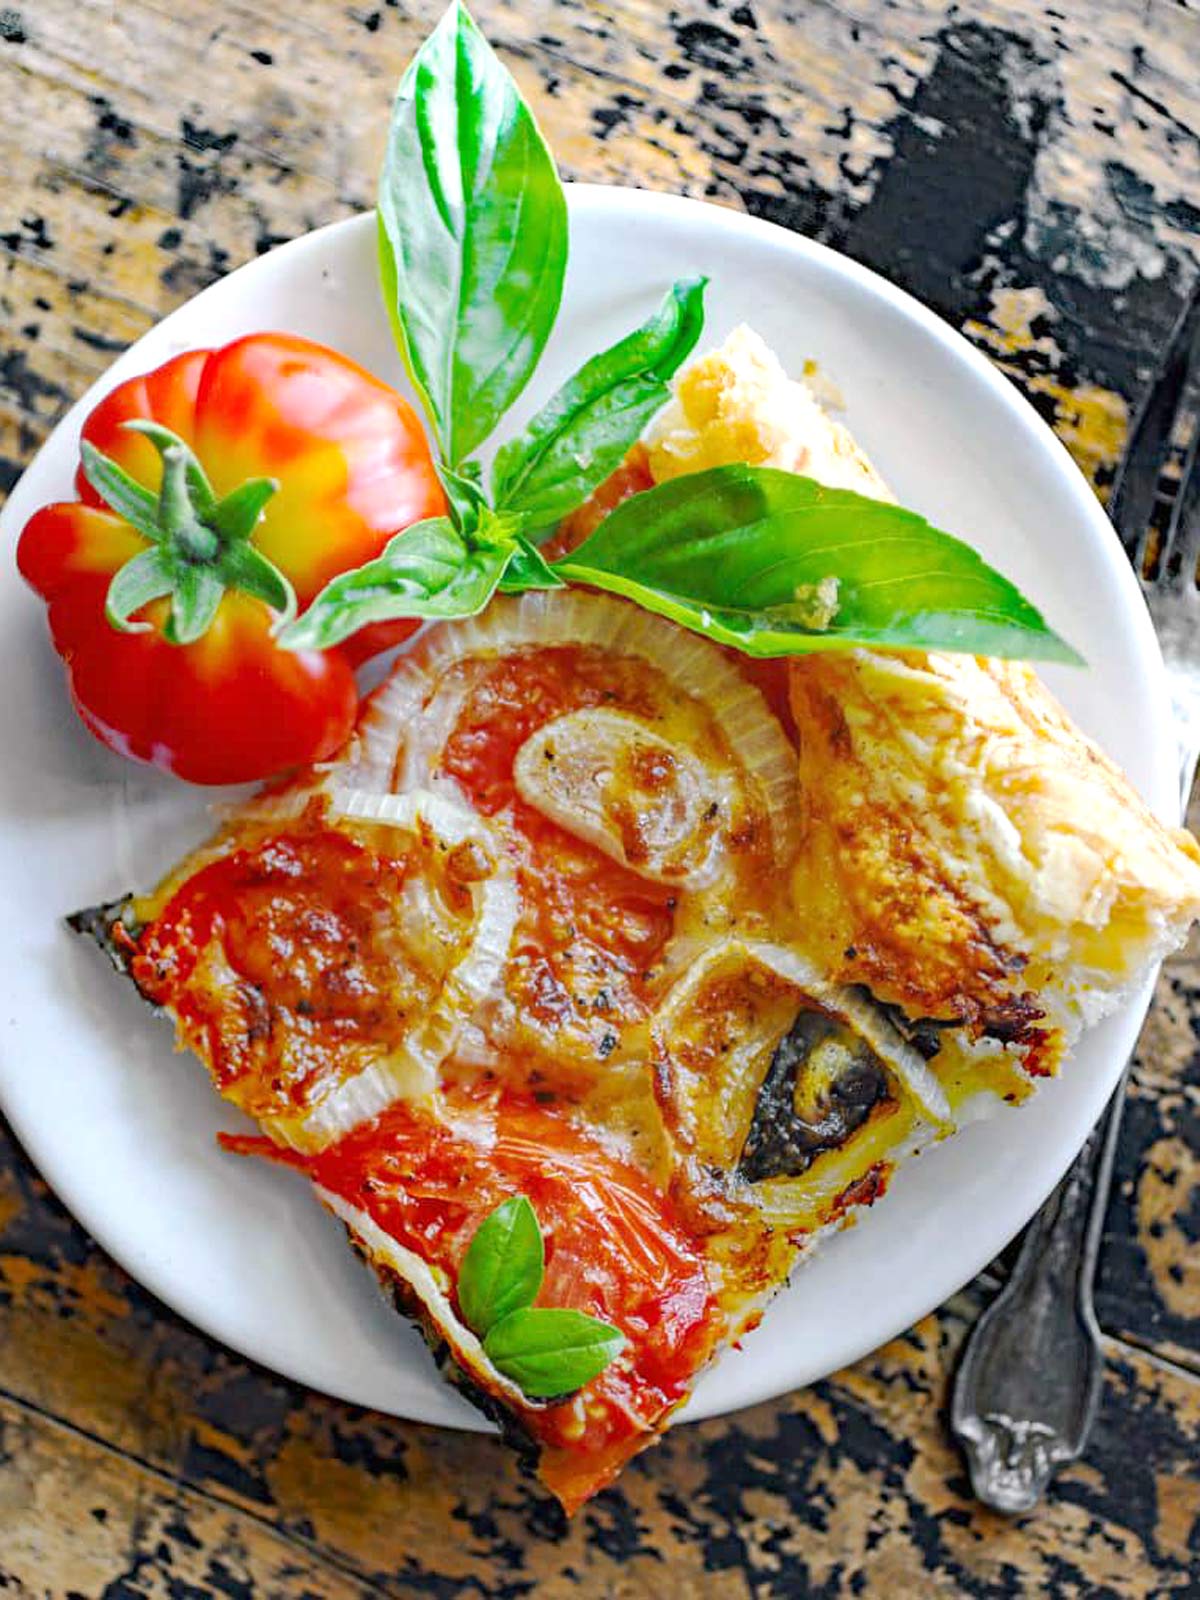 Plate with a square slice of tomato tart with basil and tomato garnish.